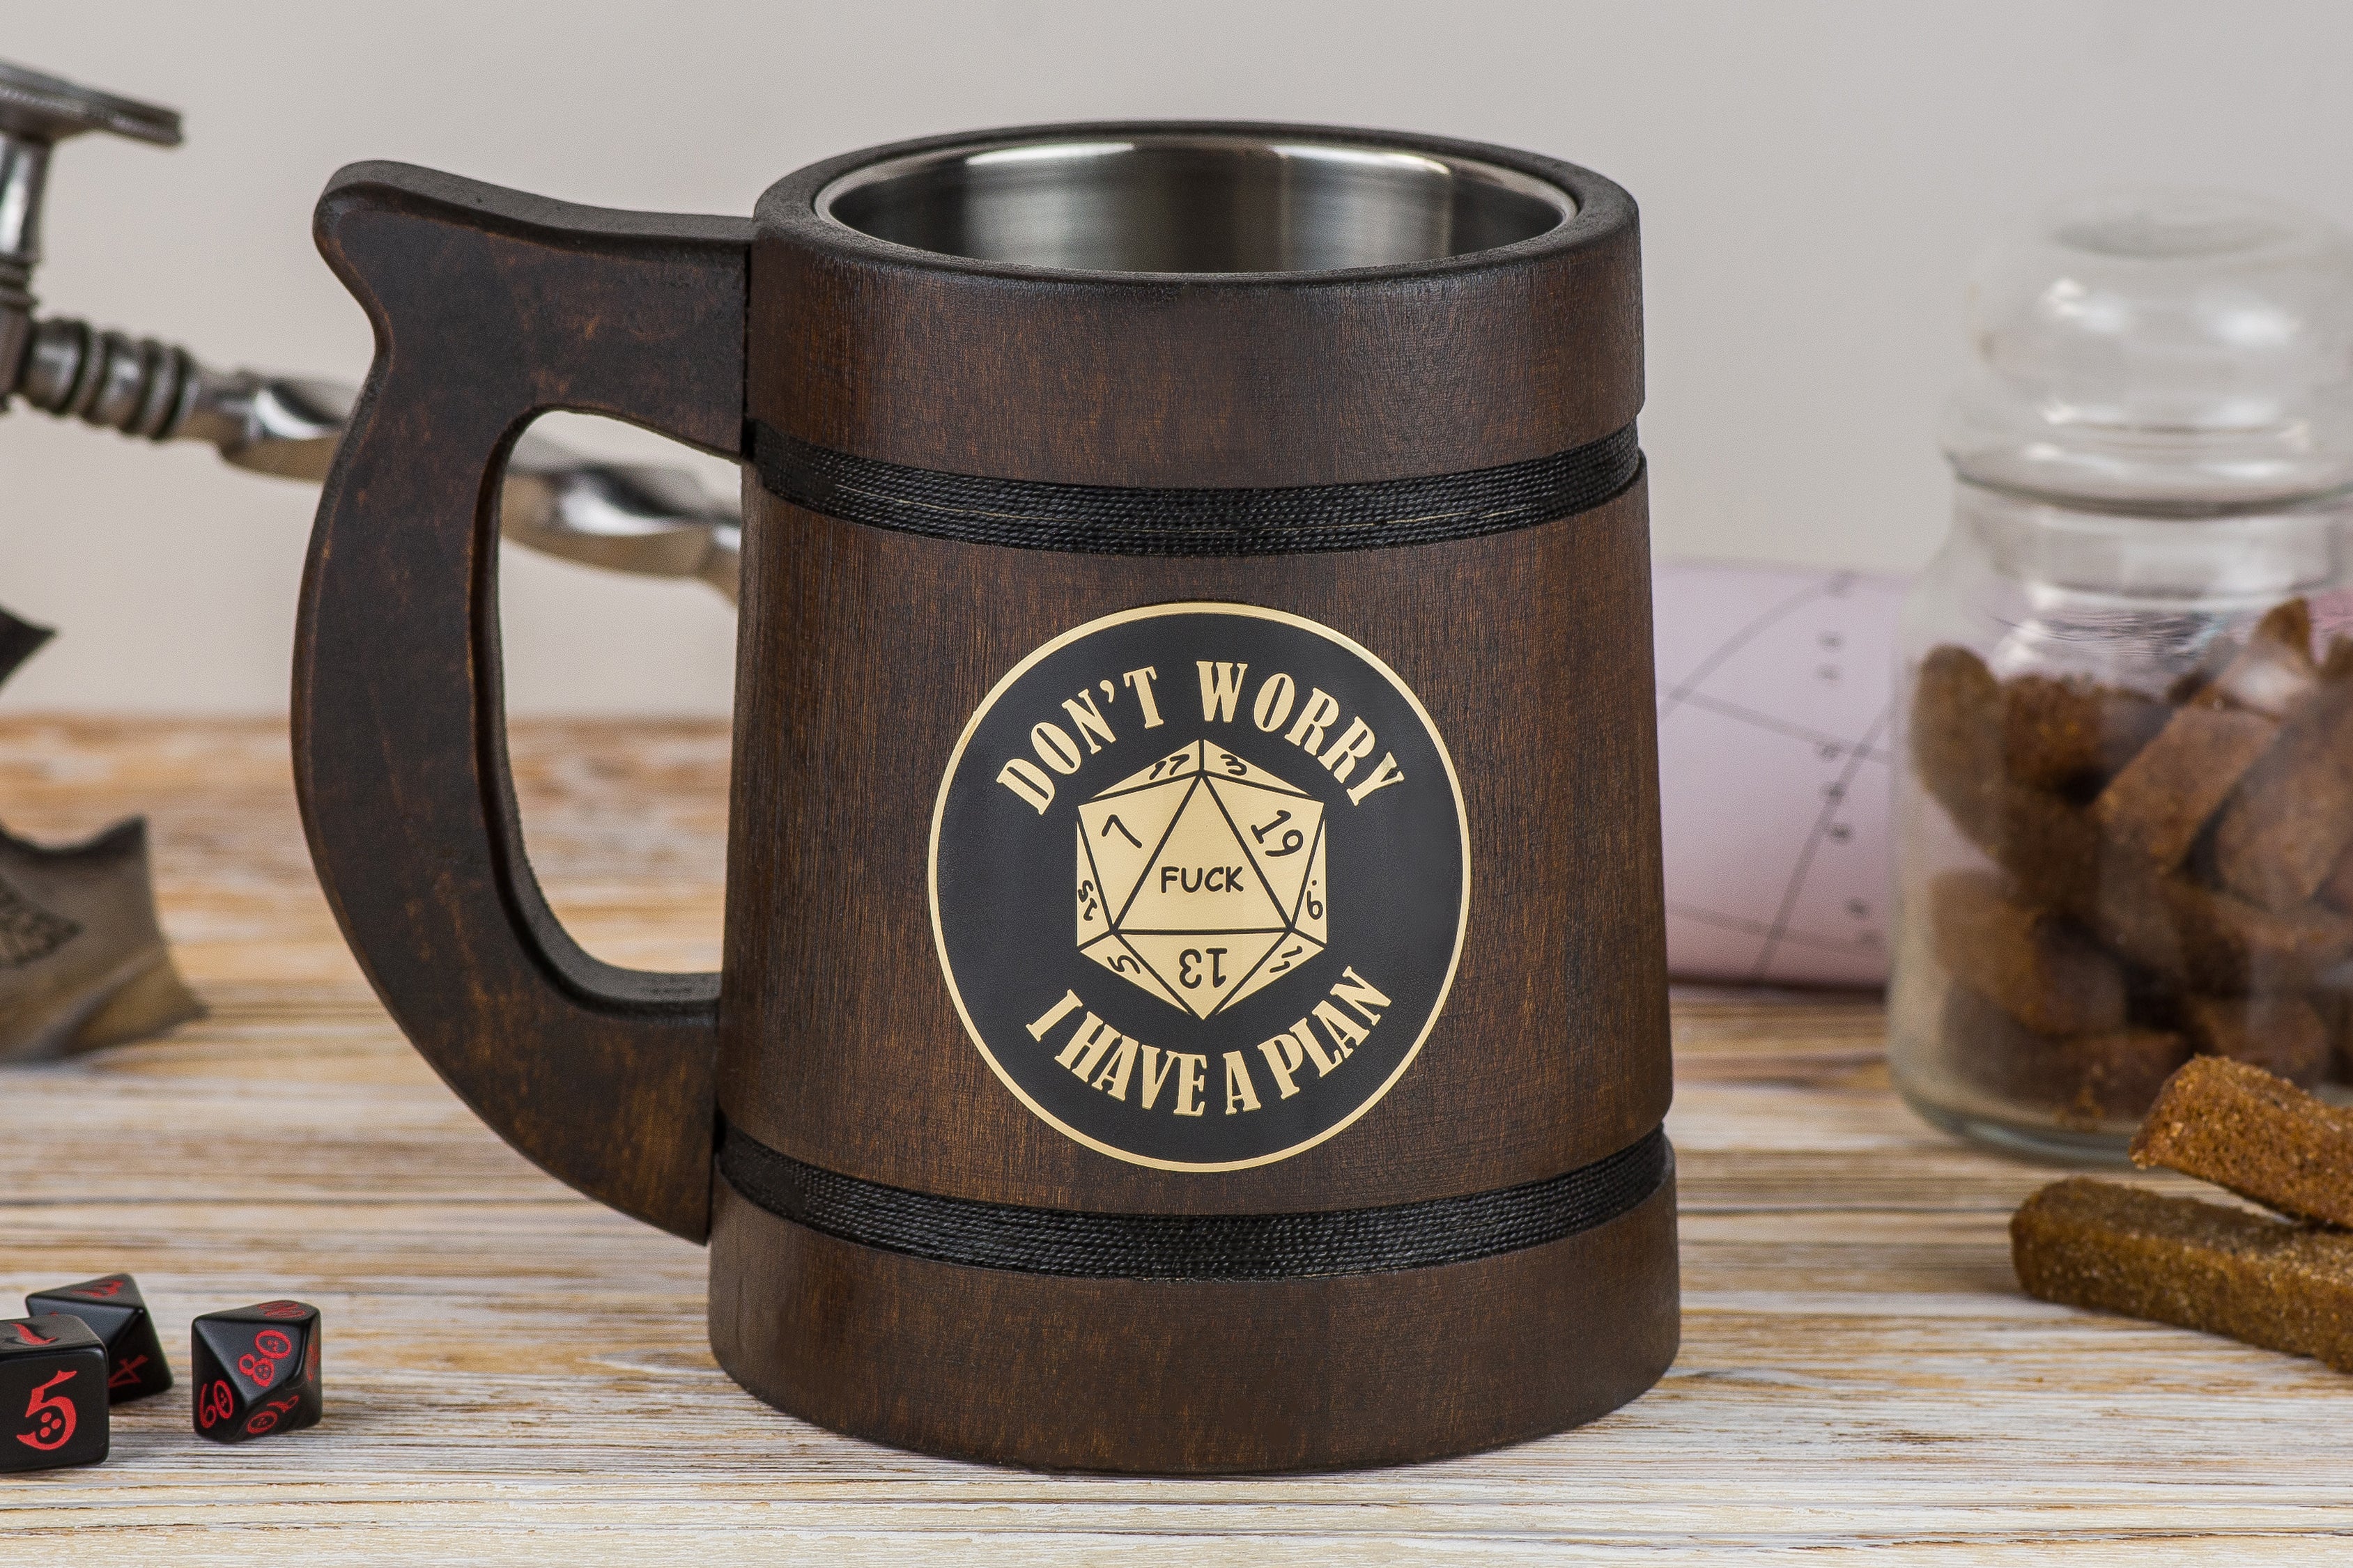 Dungeons and Dragons beer tankard "Don't worry I have a plan", DND Mugs - GravisCup